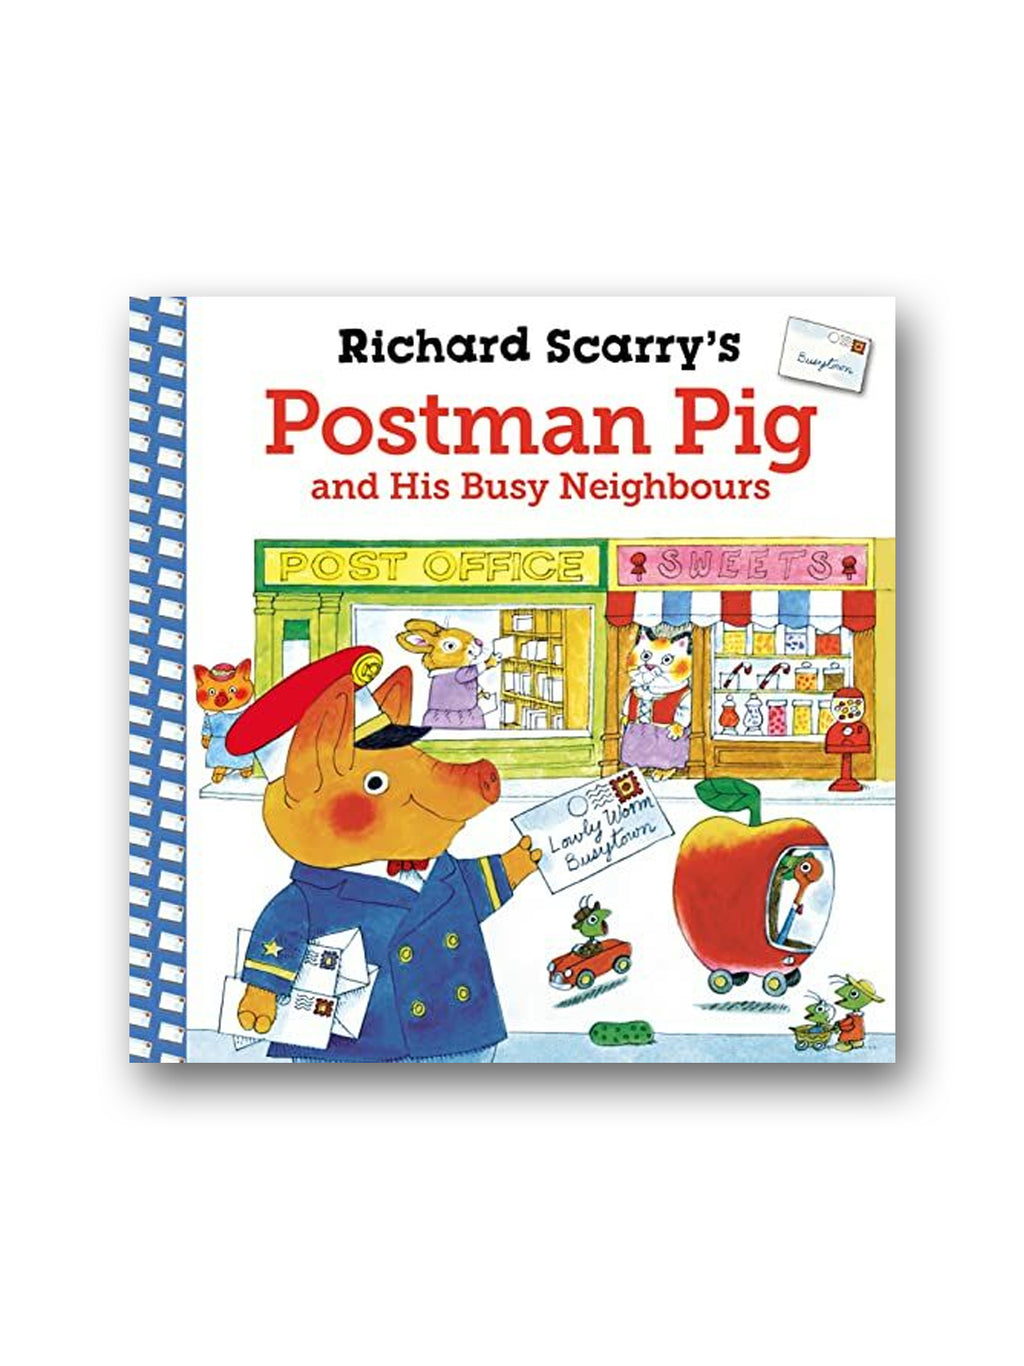 Postman Pig and His Busy Neighbours